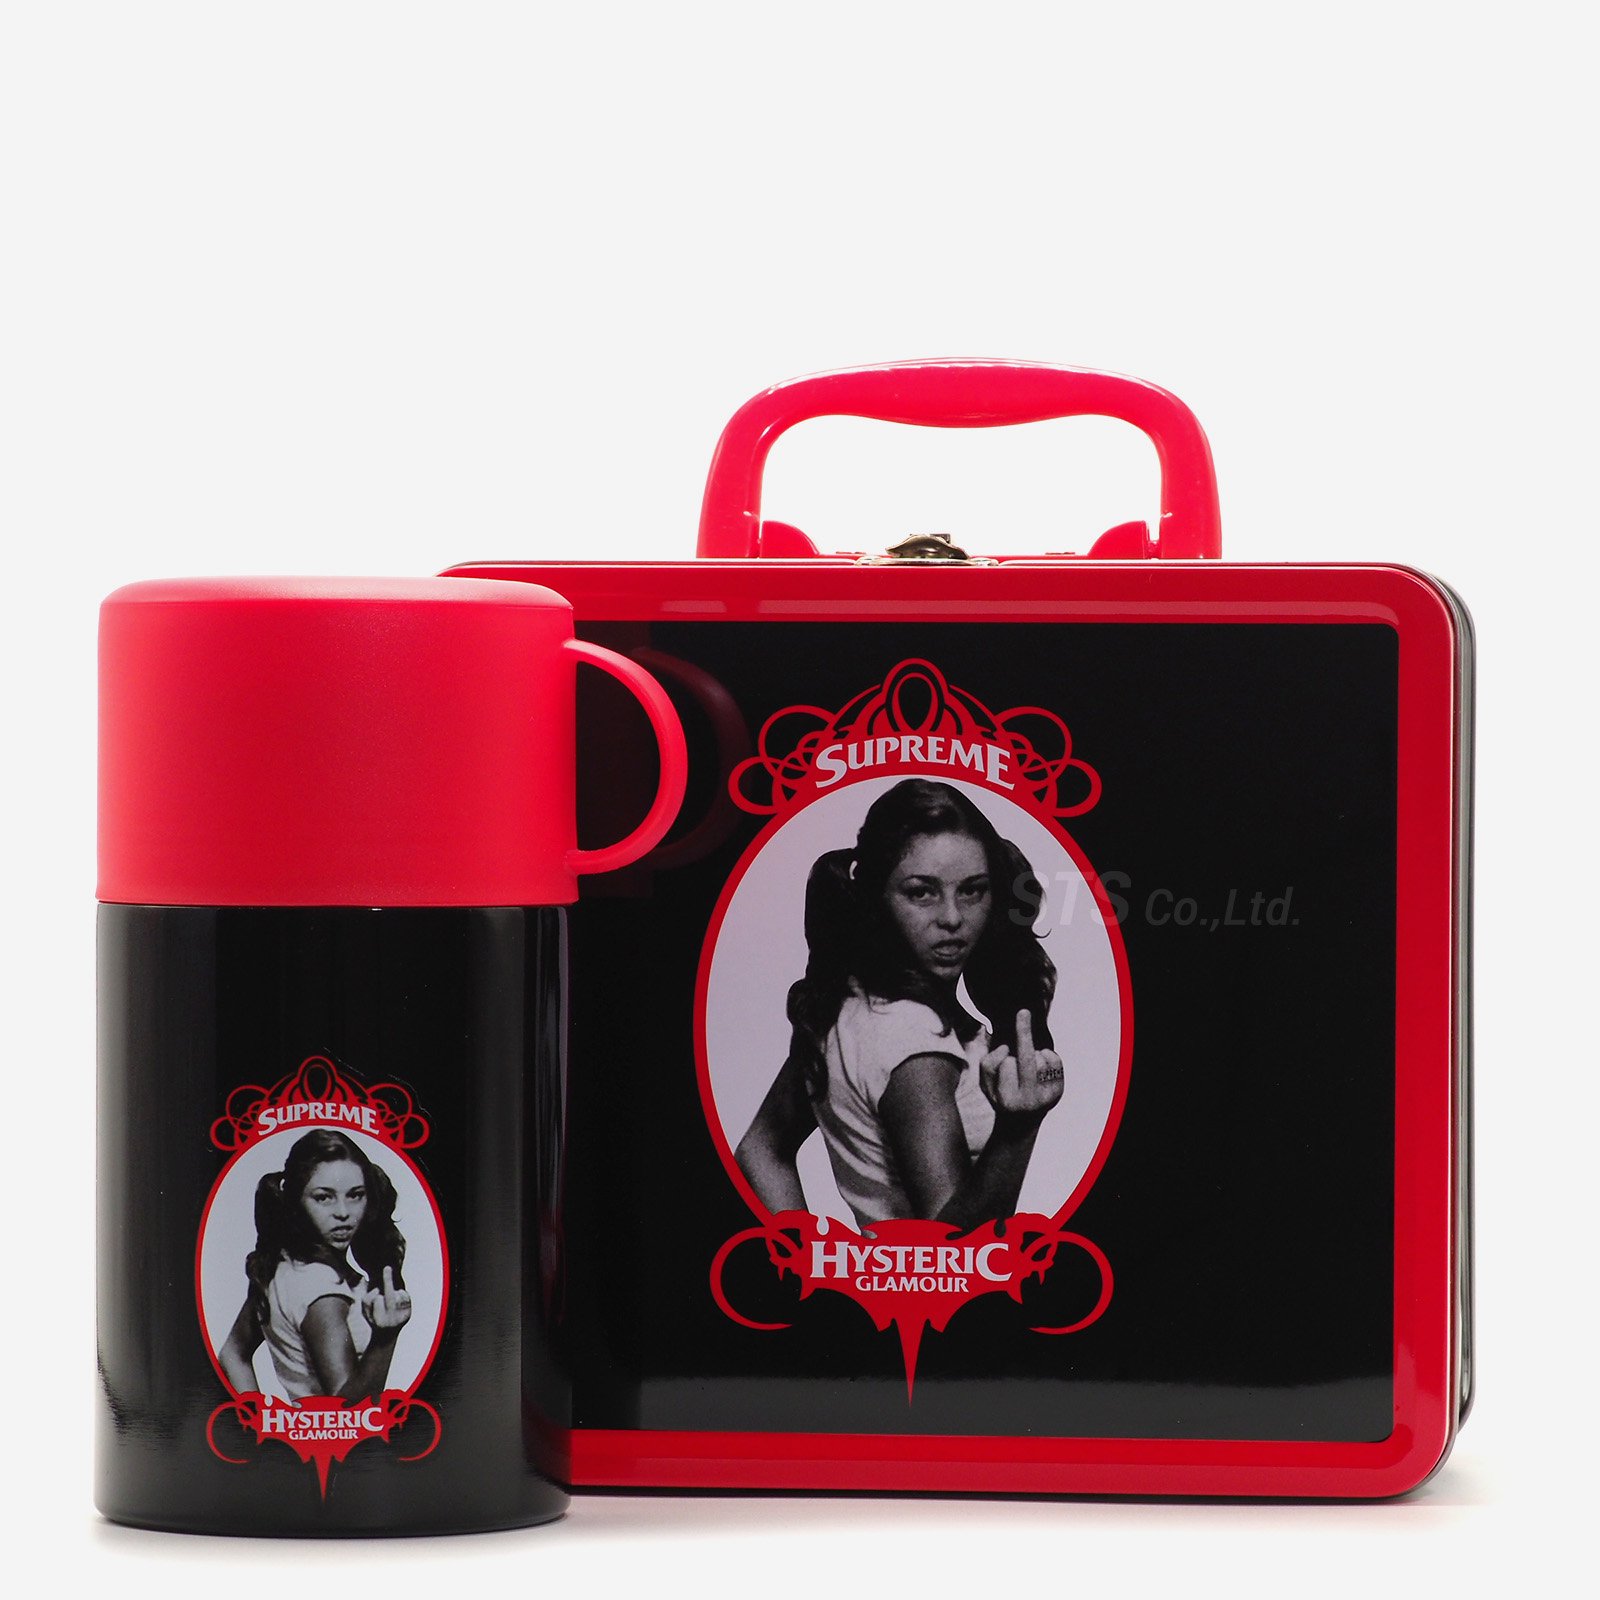 Supreme/Hysteric Glamour Lunch Box Set - ParkSIDER